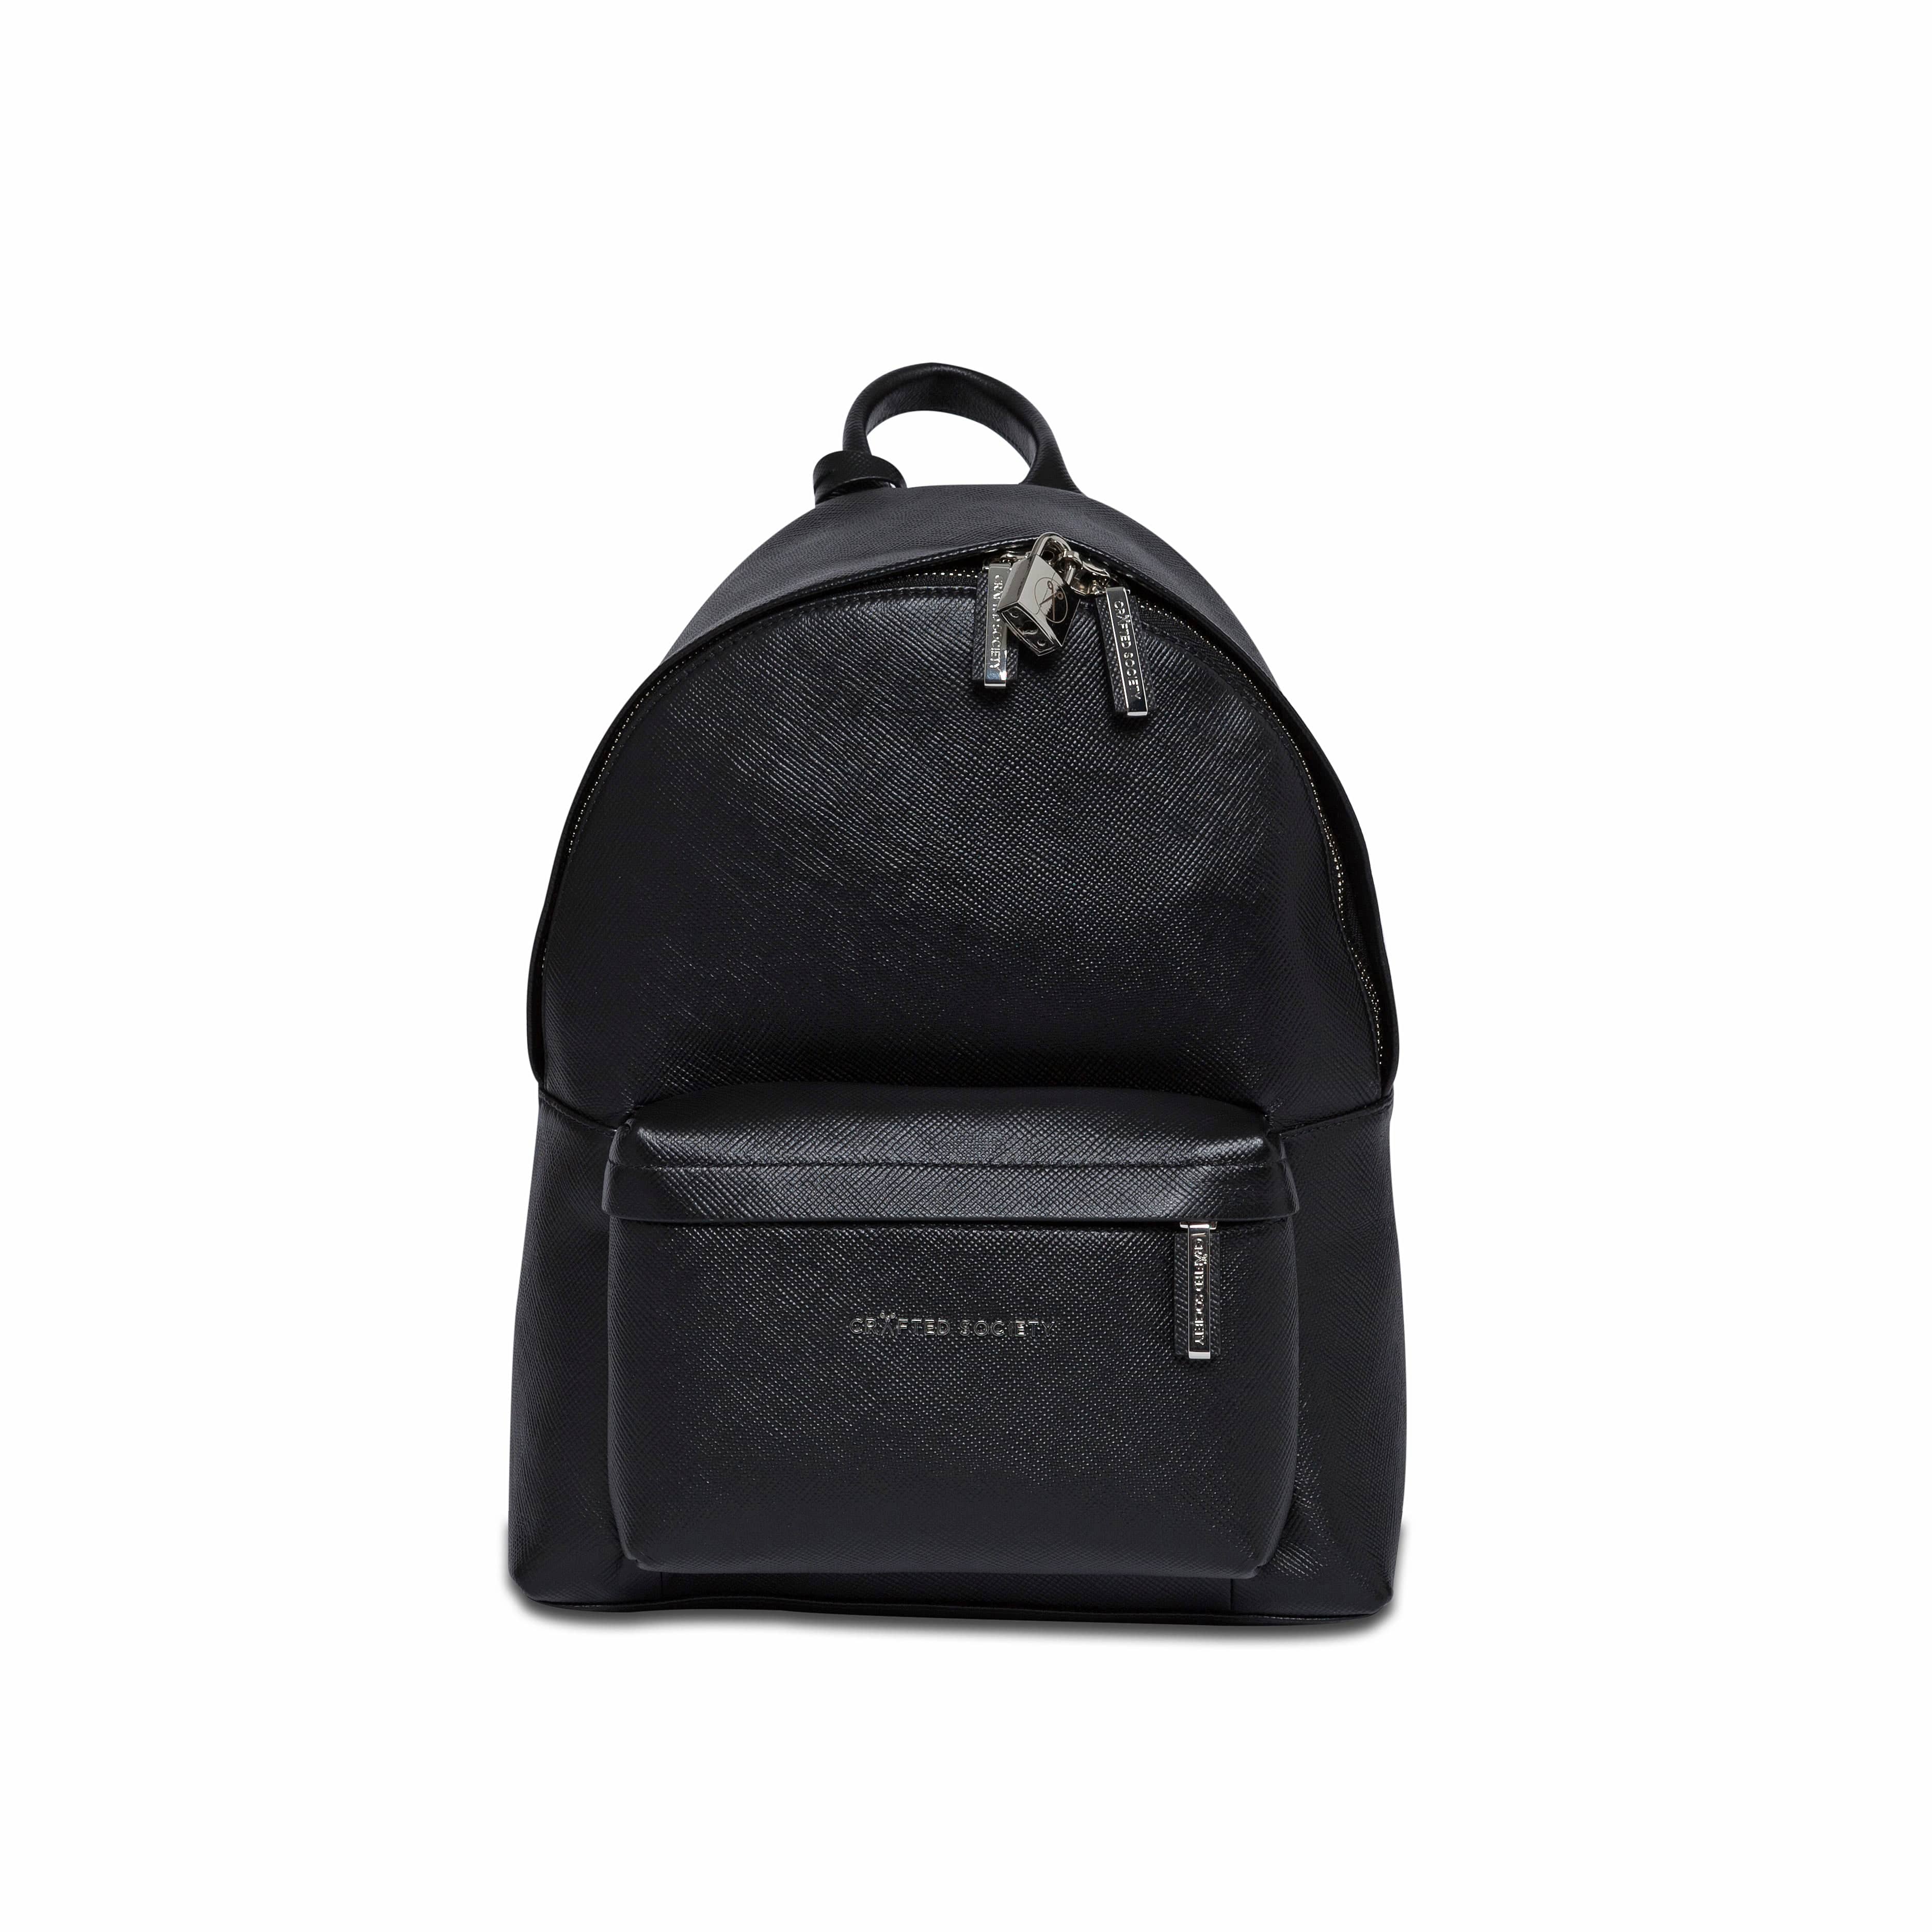 Skye Small Leather Backpack - Black Saffiano Leather